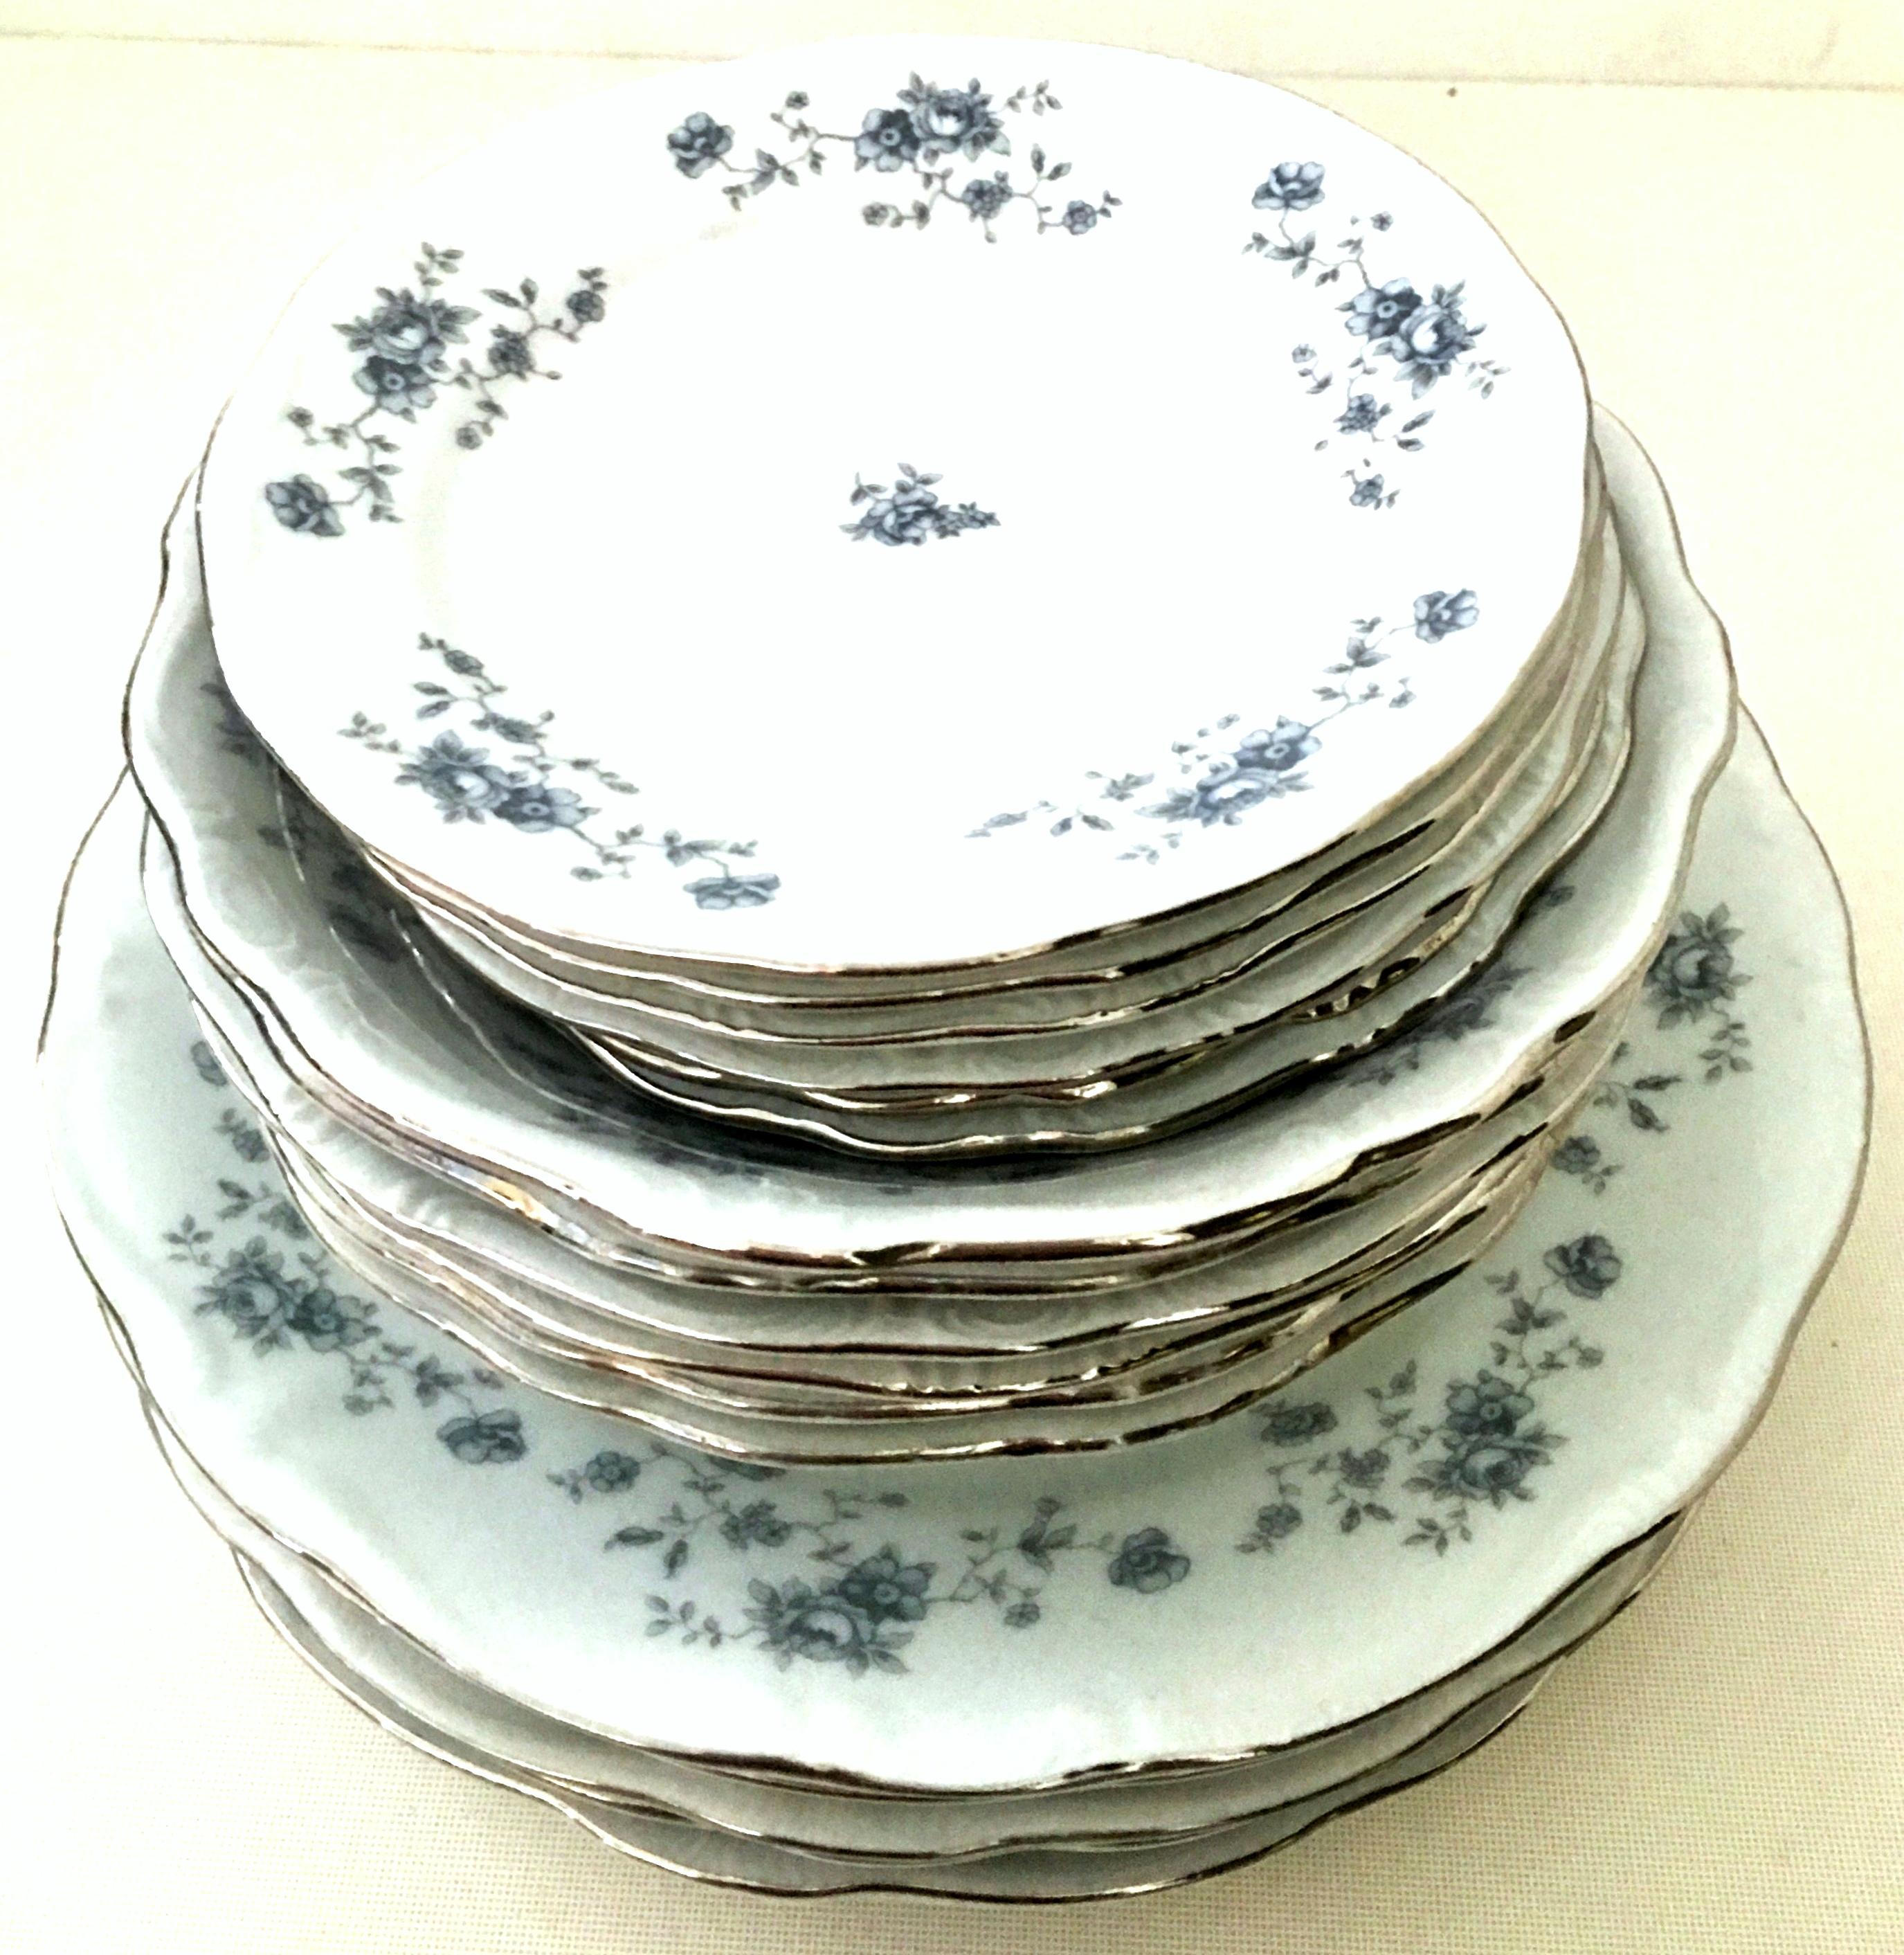 20th century German Porcelain and platinum dinnerware set of 18 by Johann Haviland. The blue Garland pattern features a bright white ground with blue floral motif, scallop and raised edge and silver platinum rim. This 18-piece set includes, six